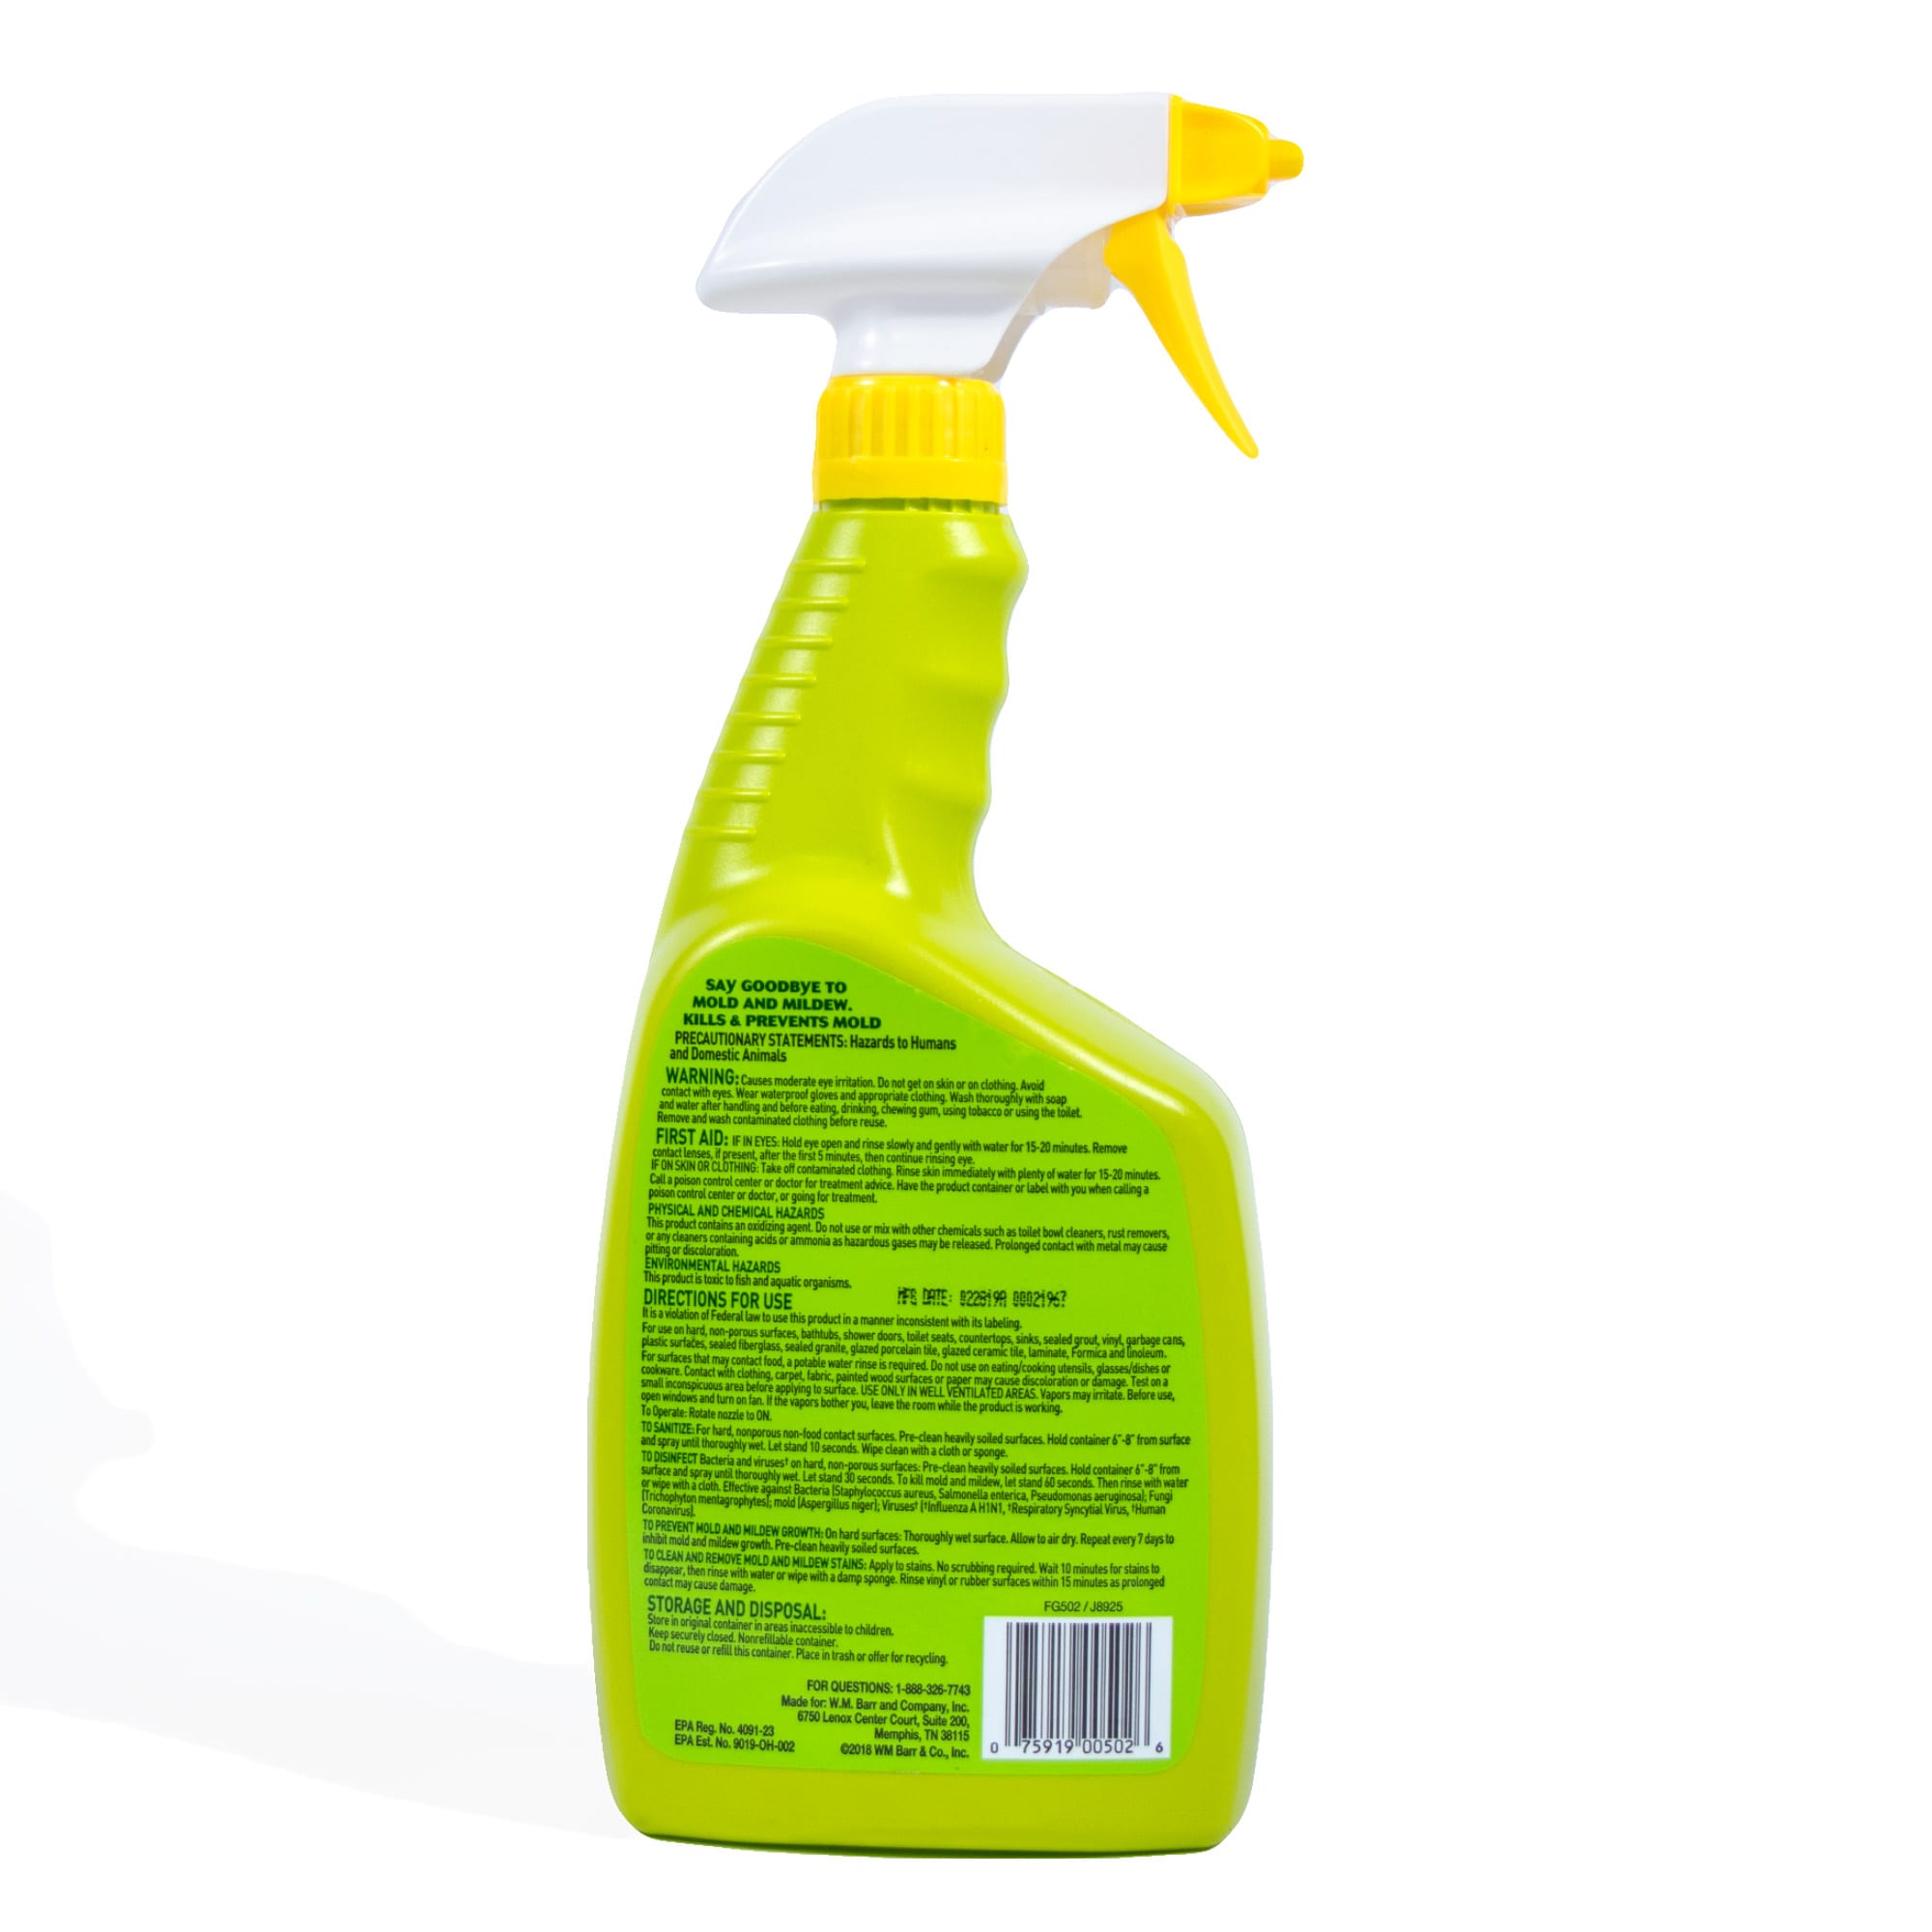 Almost 3 million bottles of mold and mildew stain remover recalled over  safety issue 